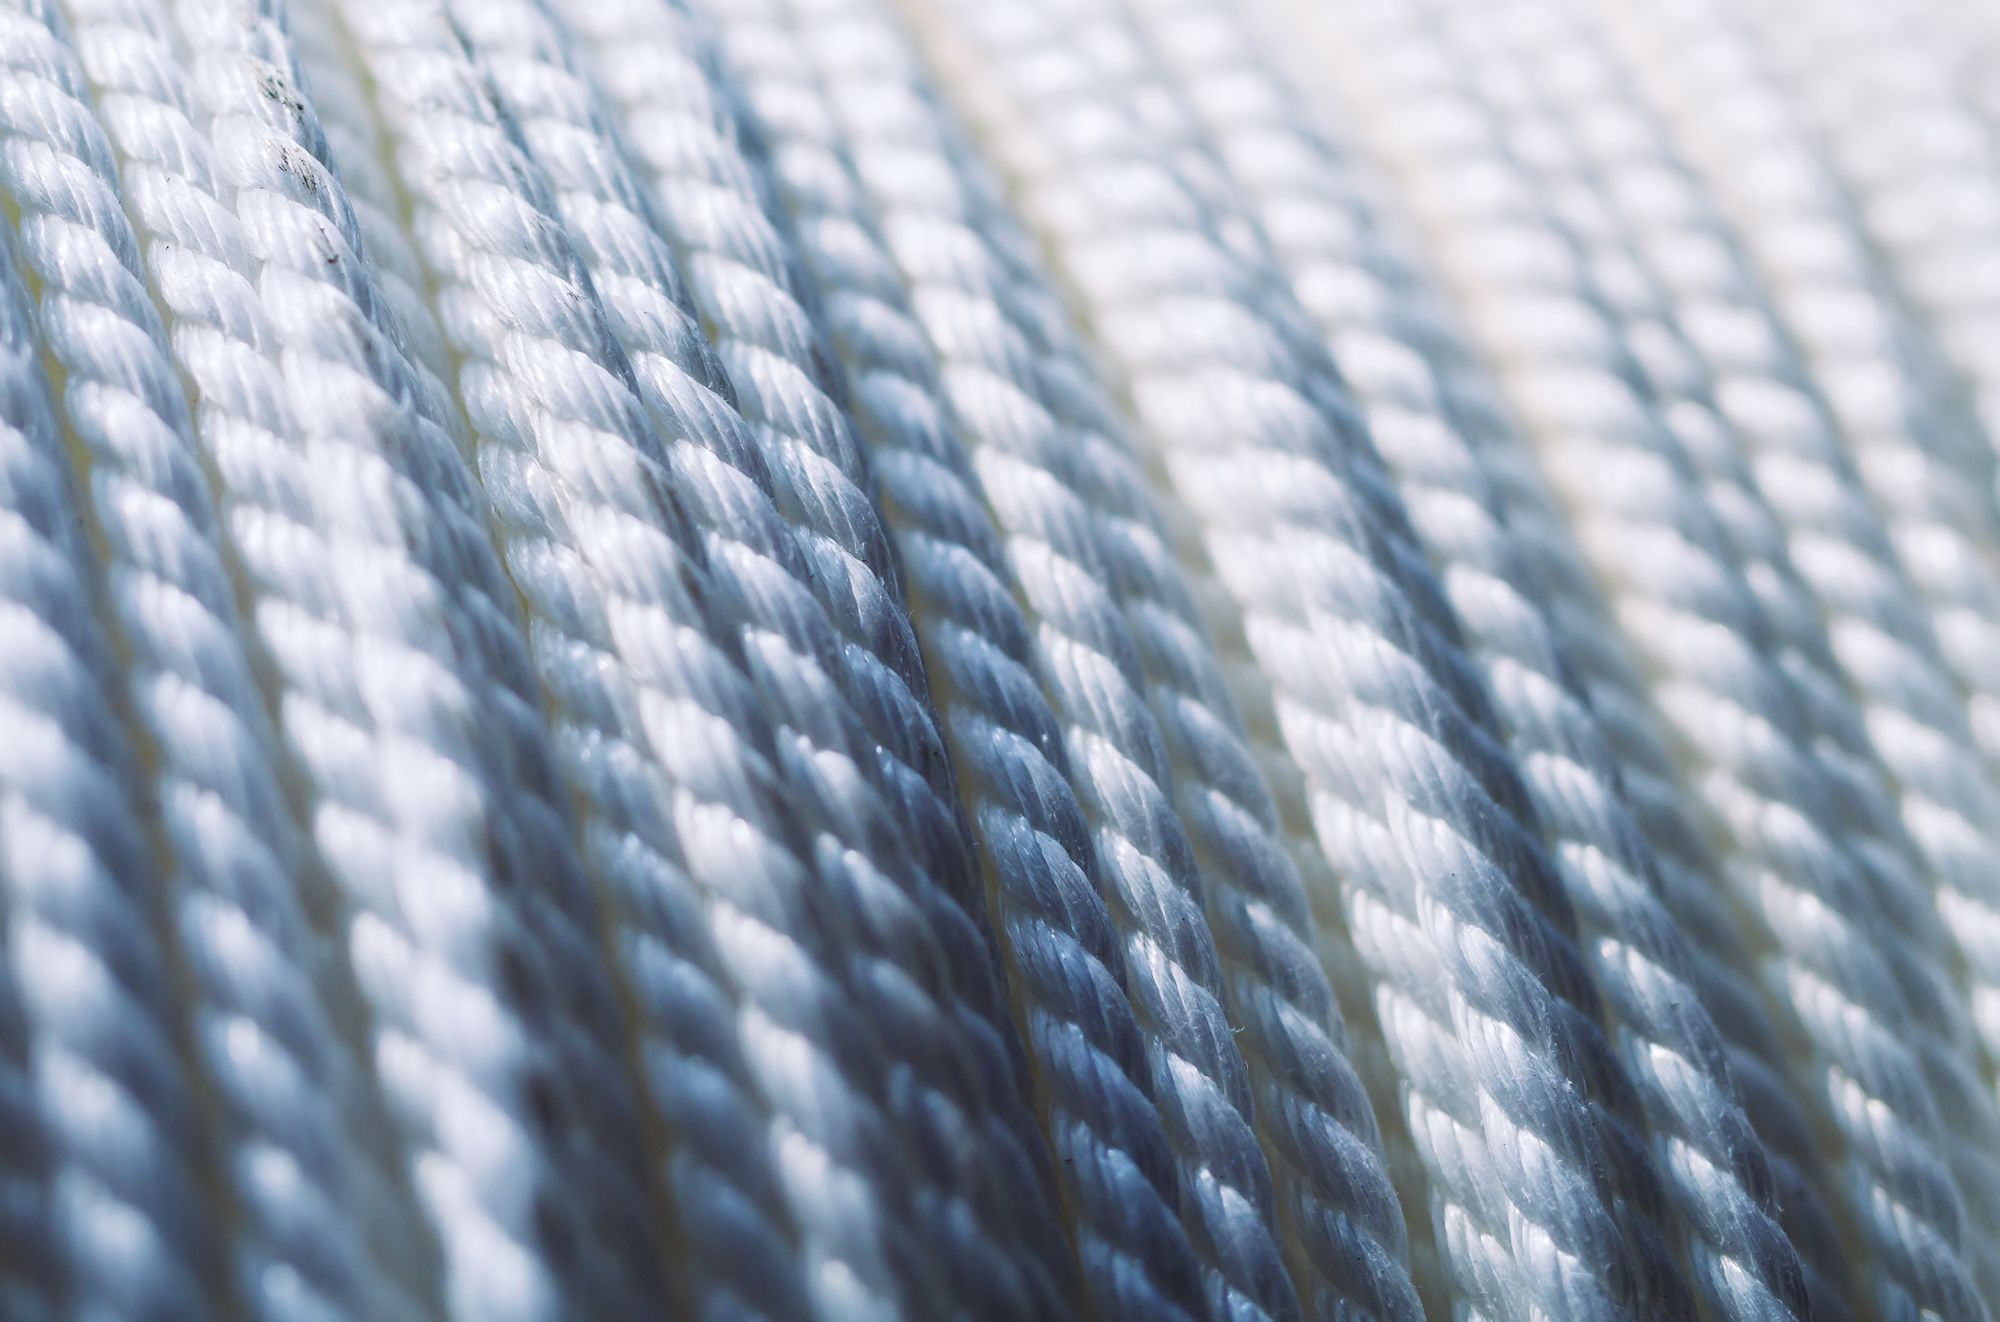 Nylon - the story of the first synthetic fibre